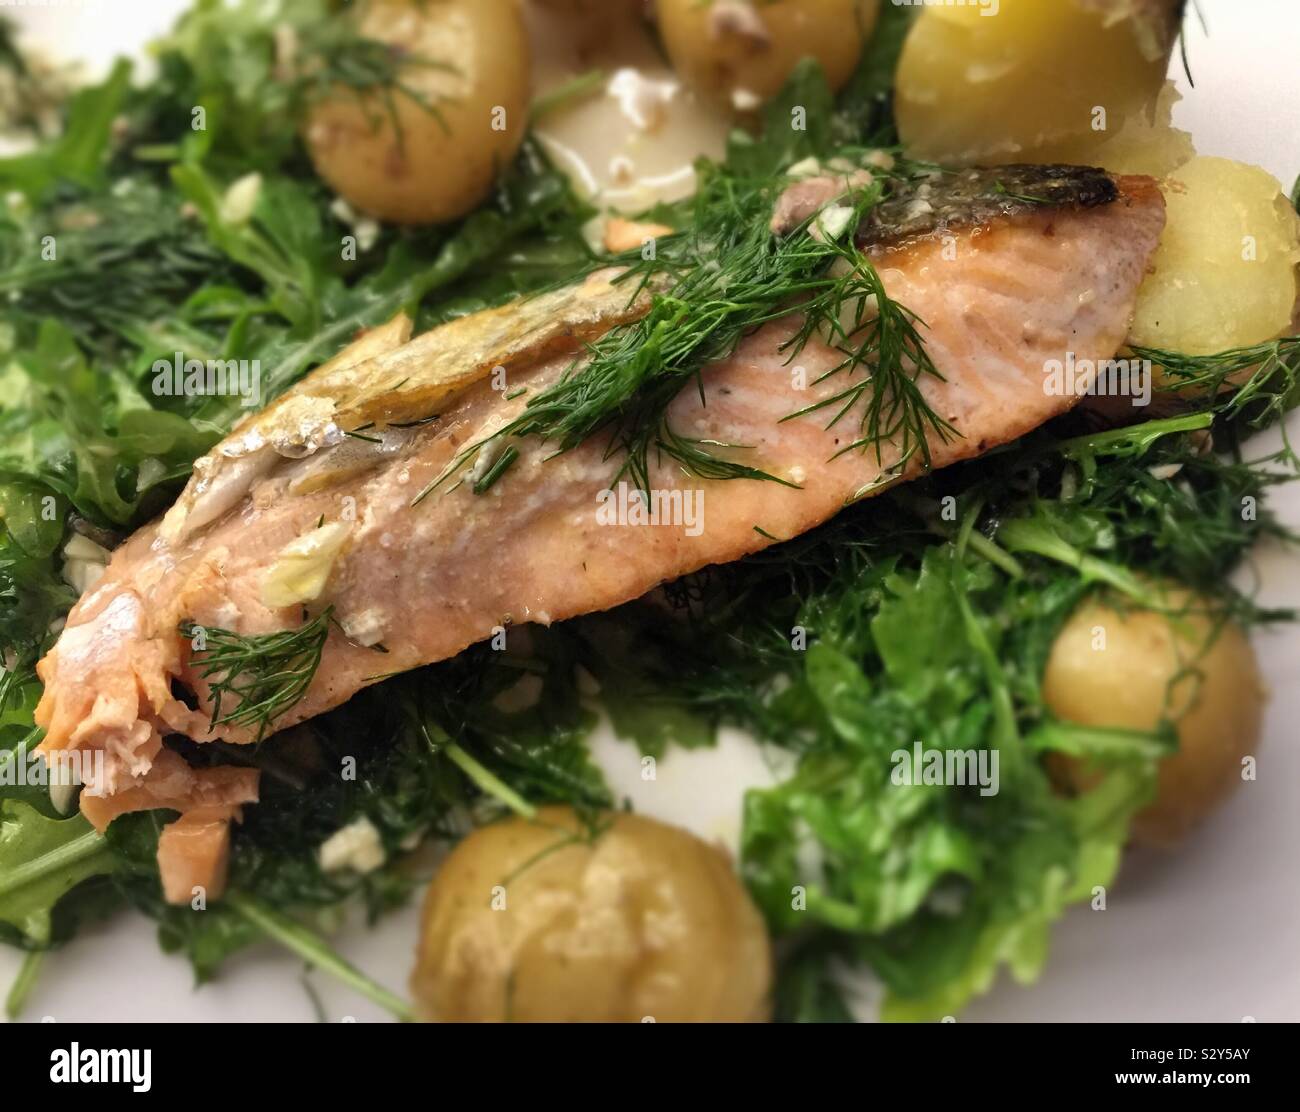 Close up of a gourmet entrée of seared salmon fillet on a bed of arugula with new potatoes and a lemon garlic dressing Stock Photo